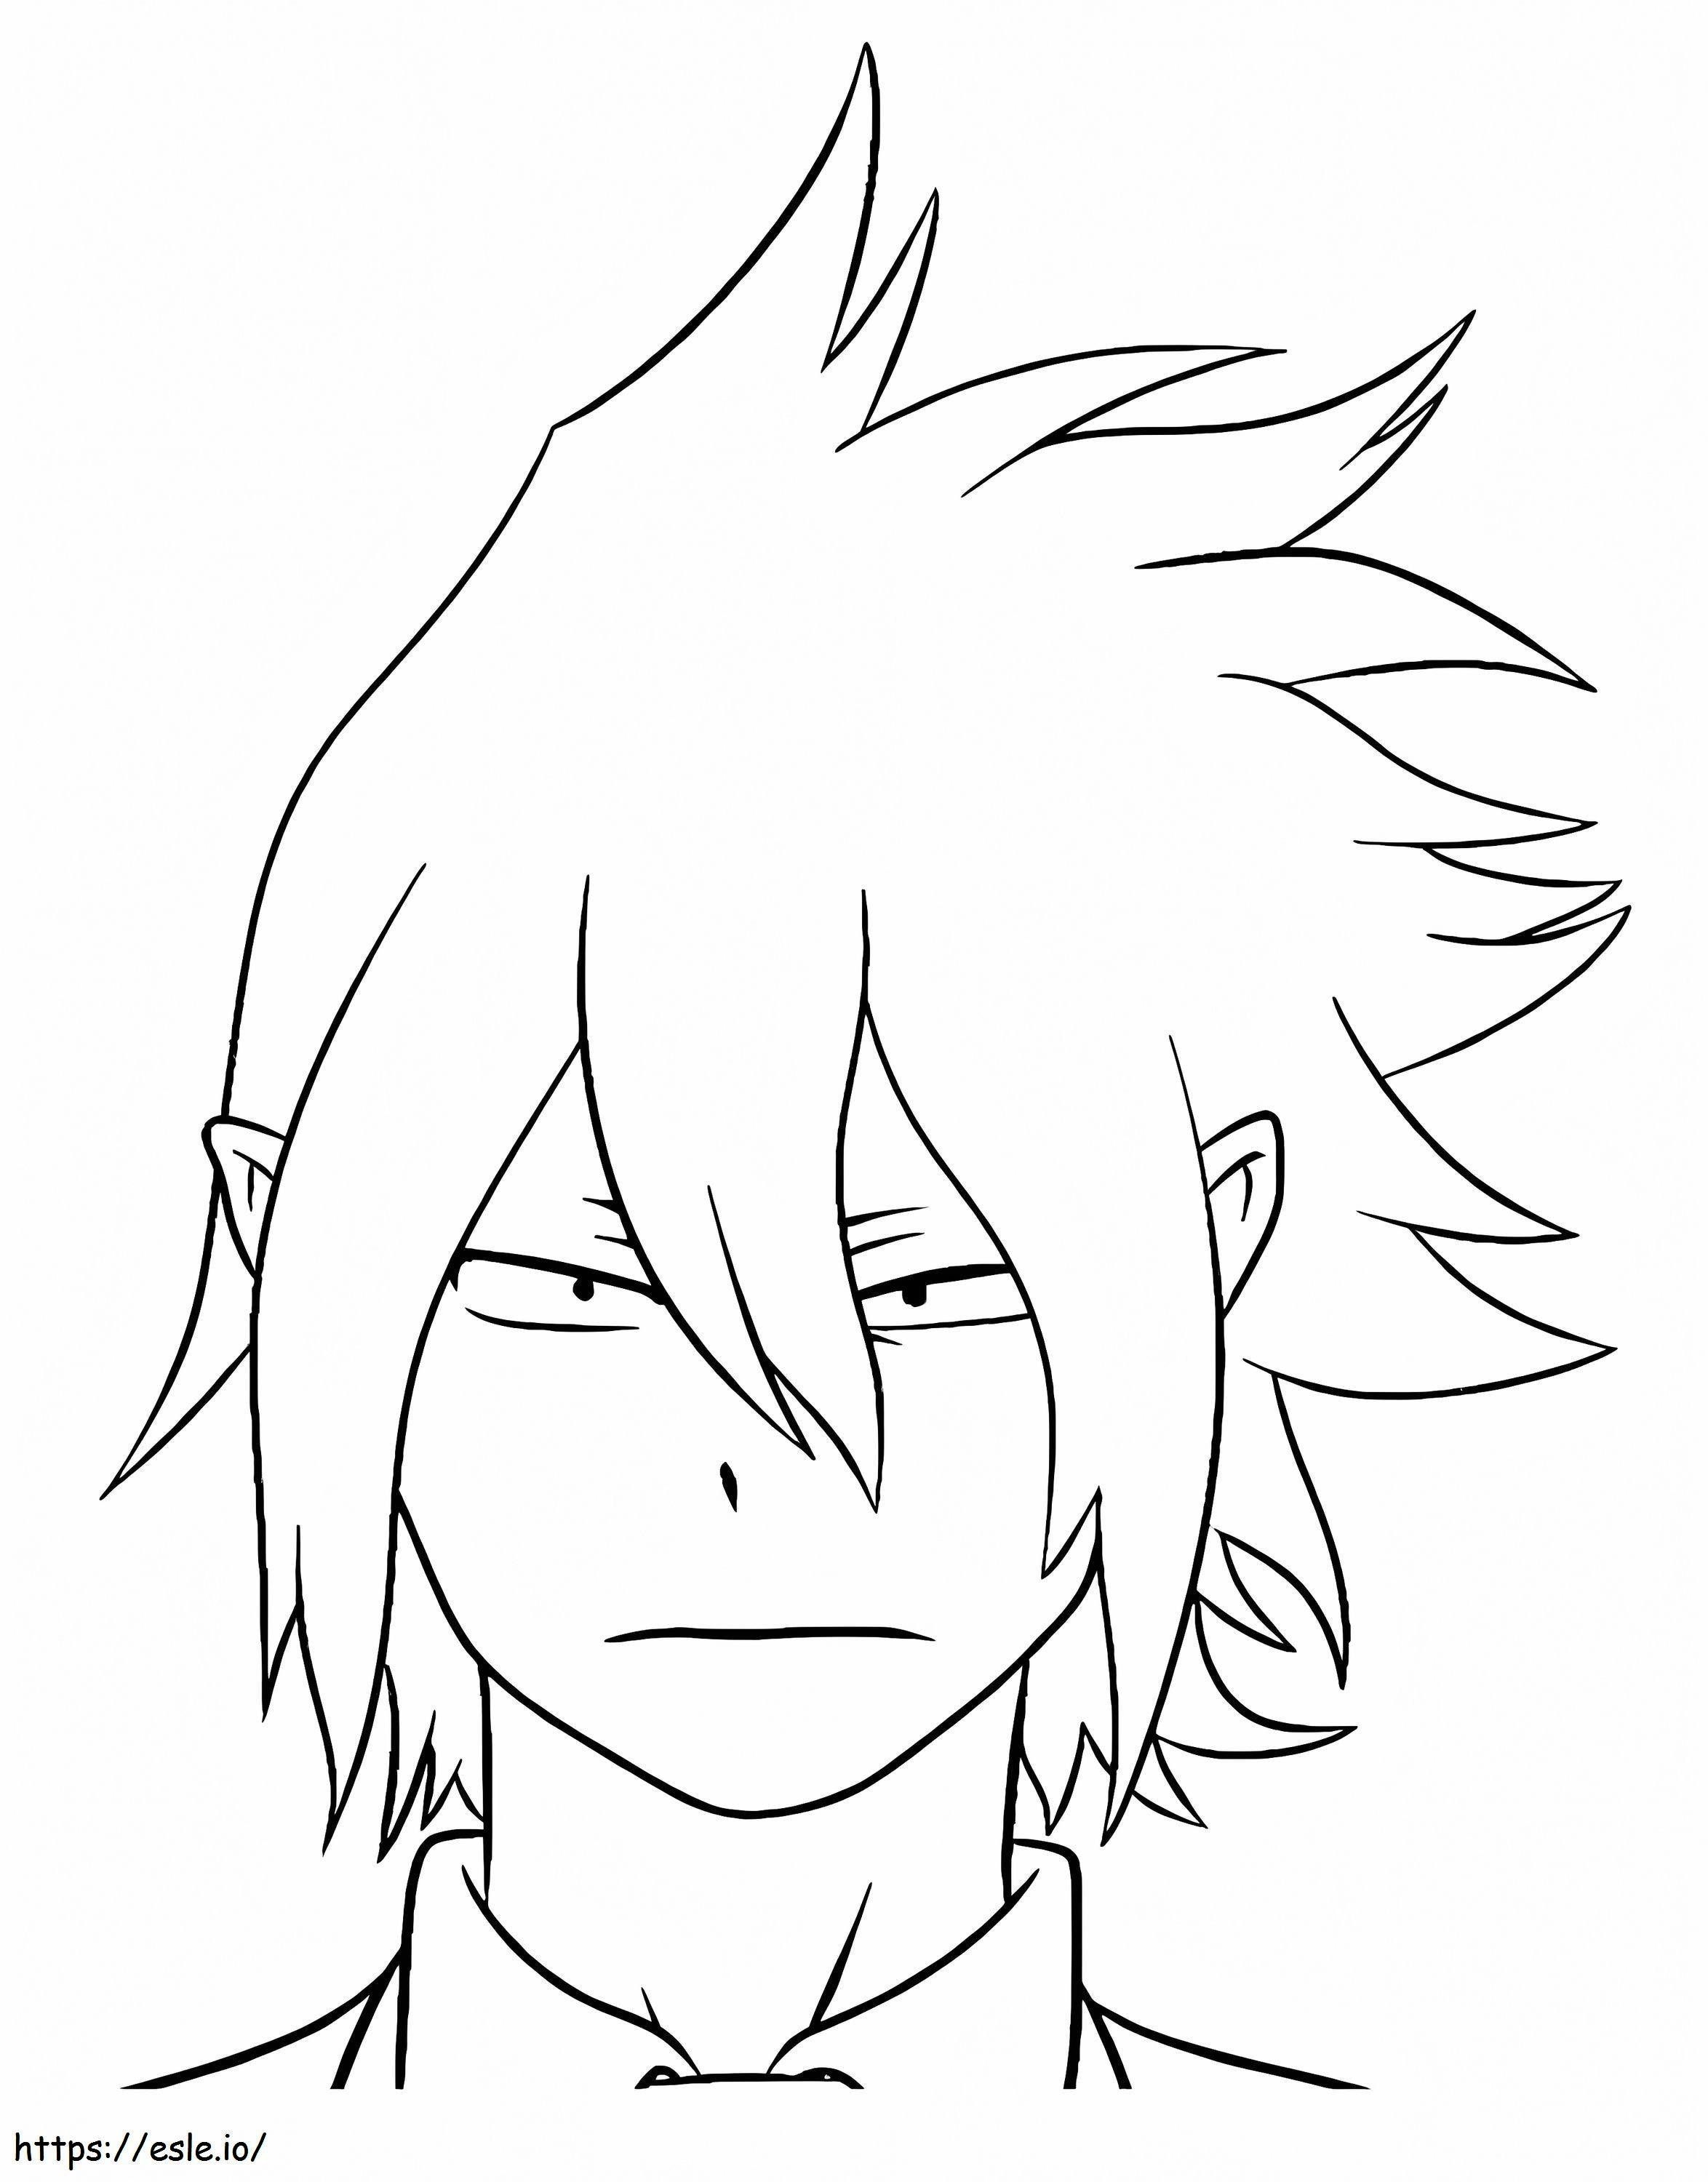 Tamaki Amajikis Face coloring page